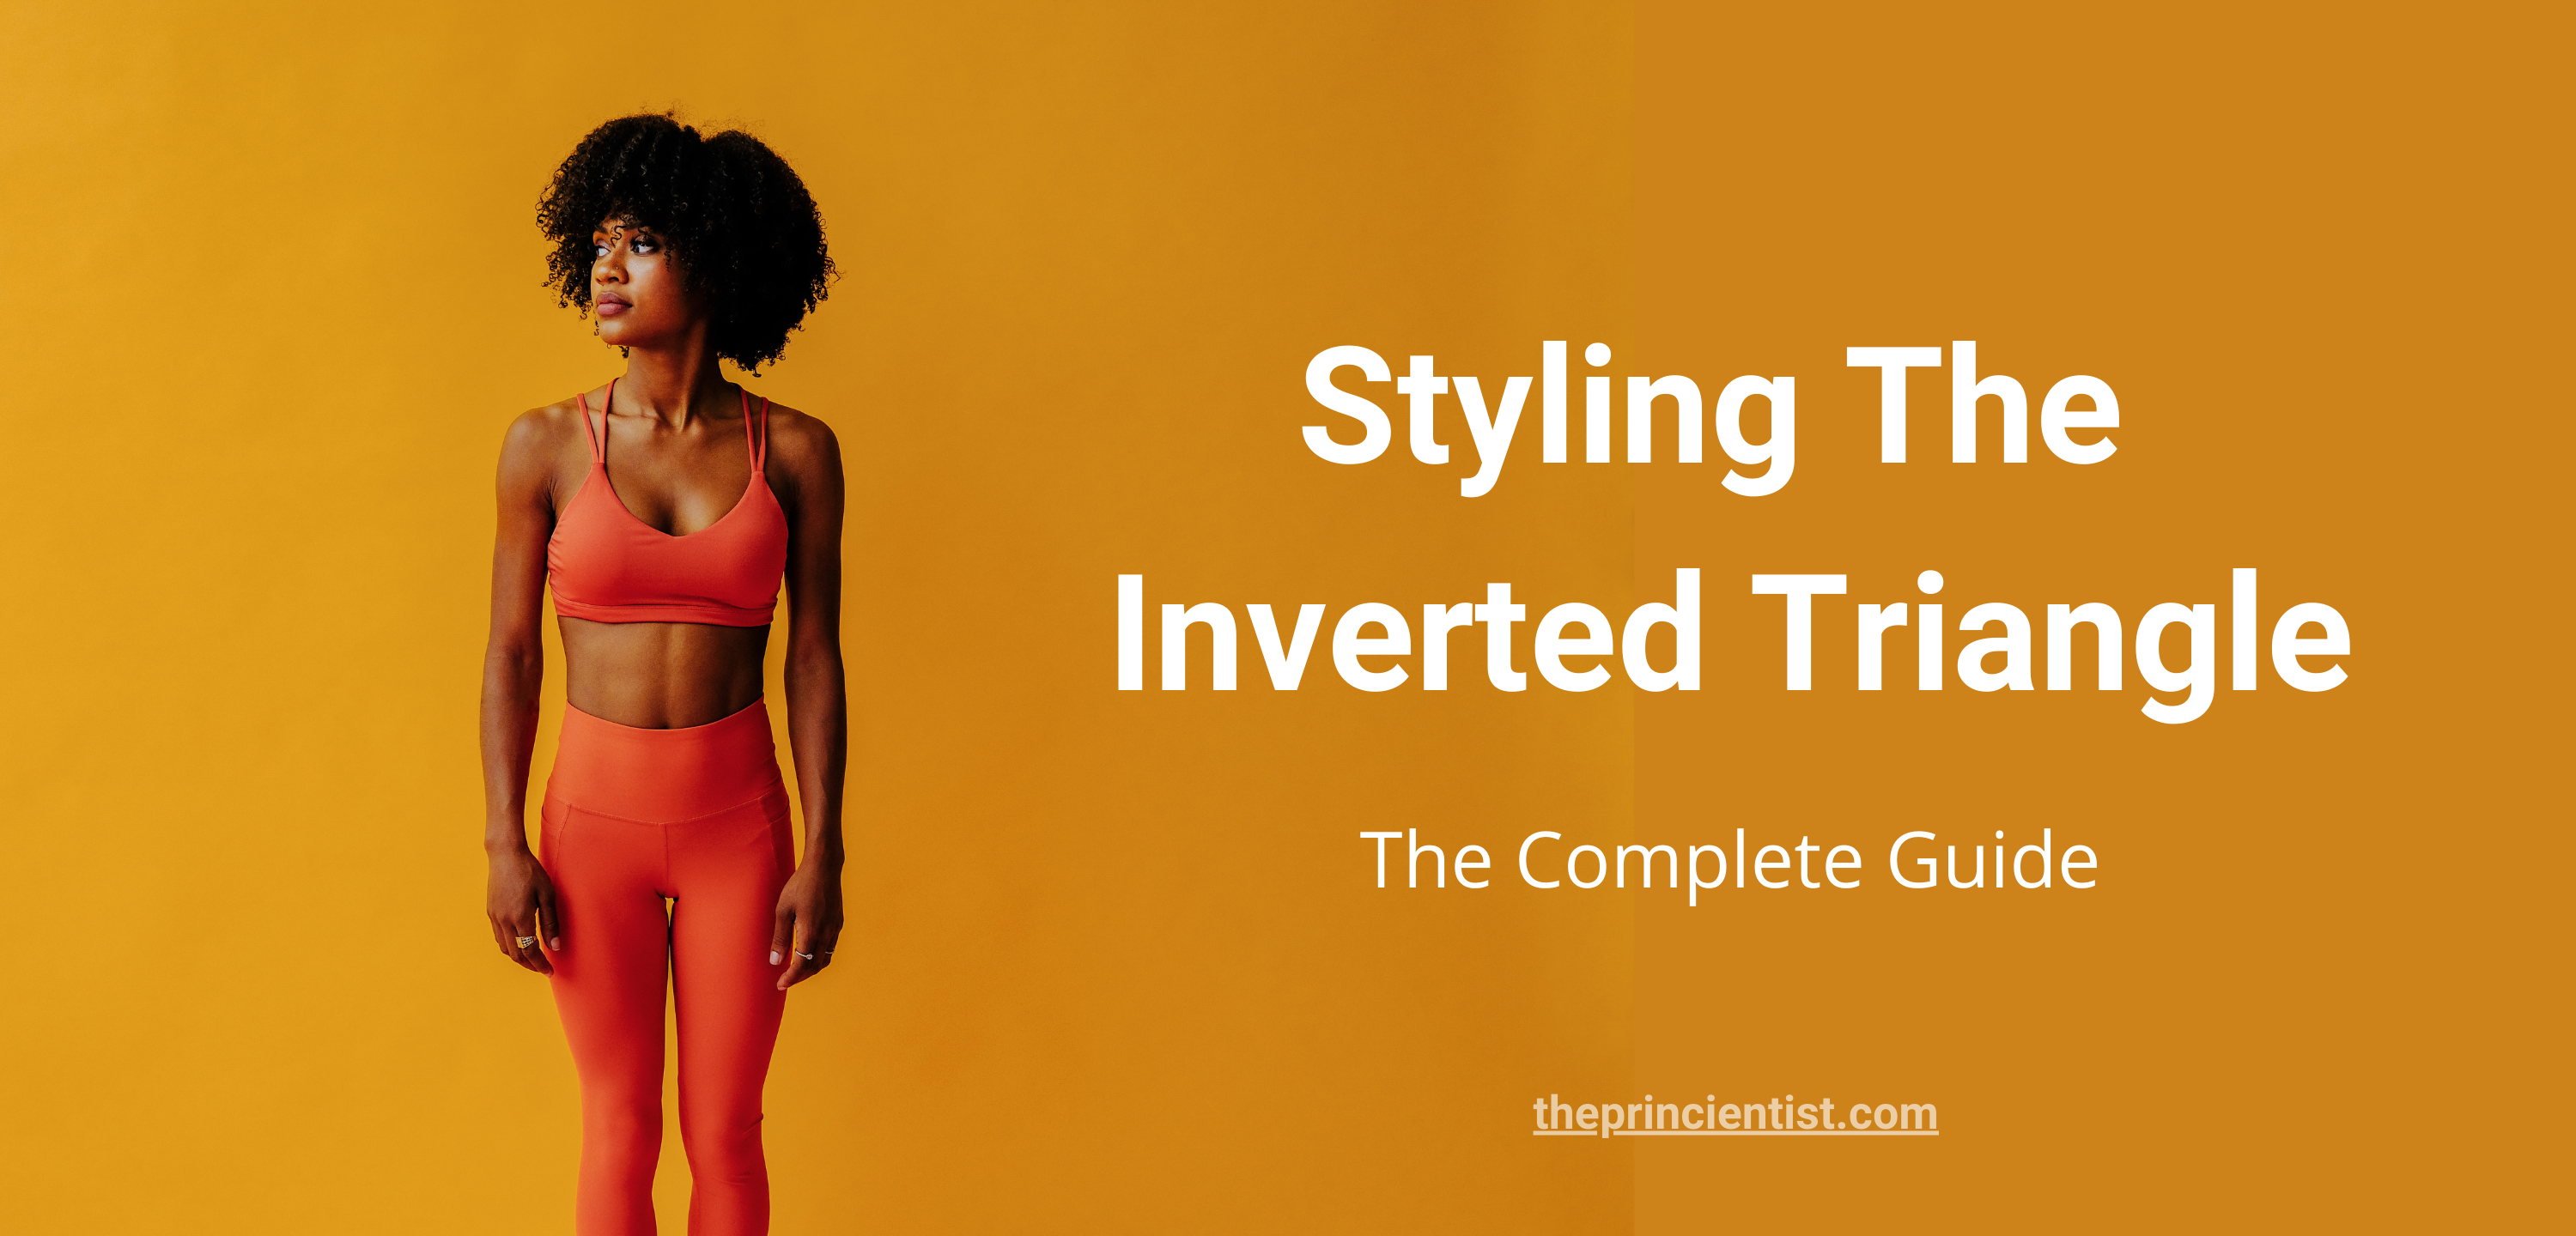 How To Dress The Inverted Triangle Body Shape – Complete Guide